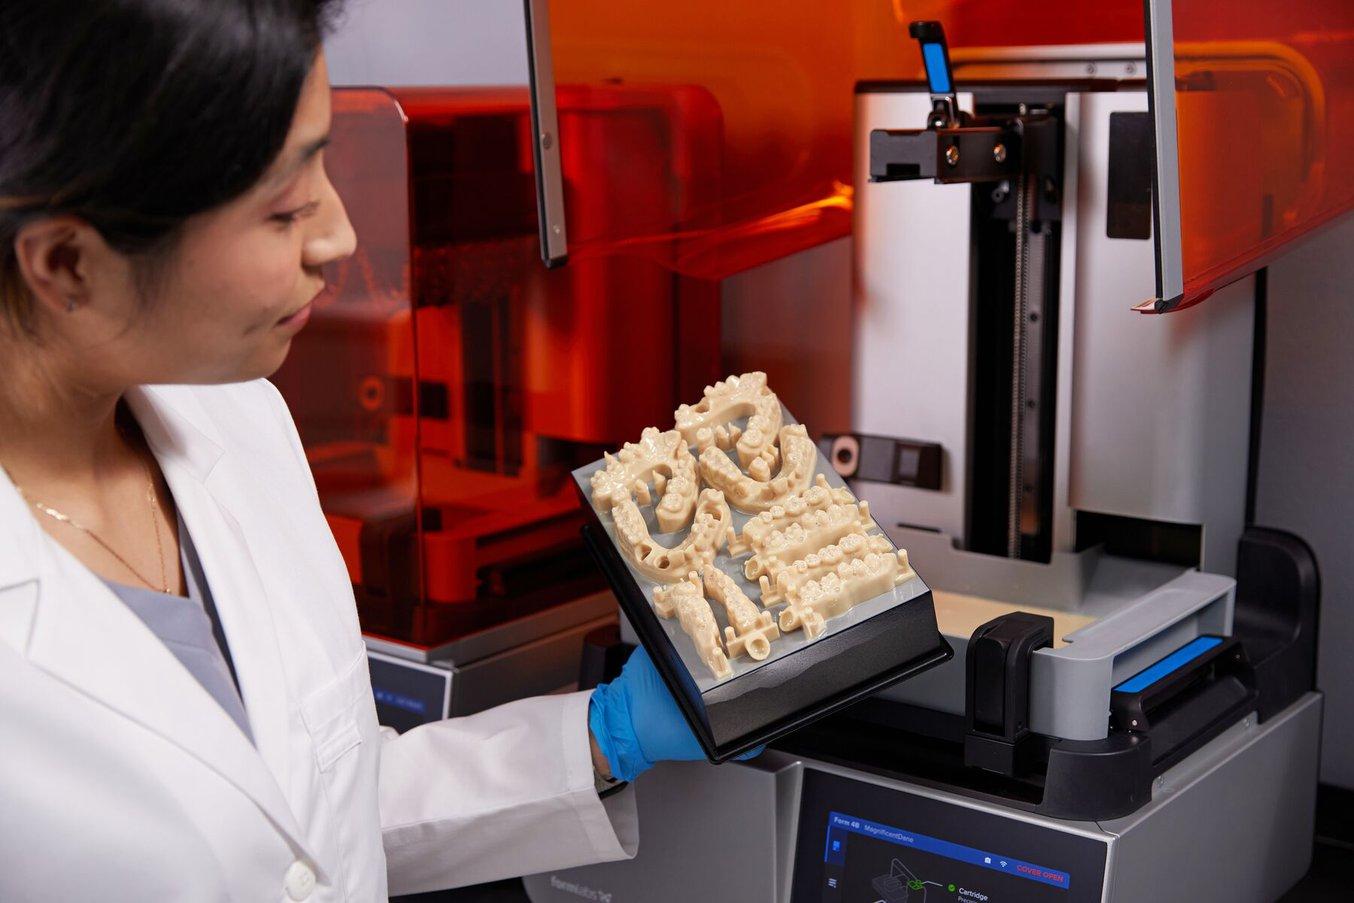 Dental professional wearing gloves holds a build platform with 3D printed models. Behind her is a Form 4B 3D printer